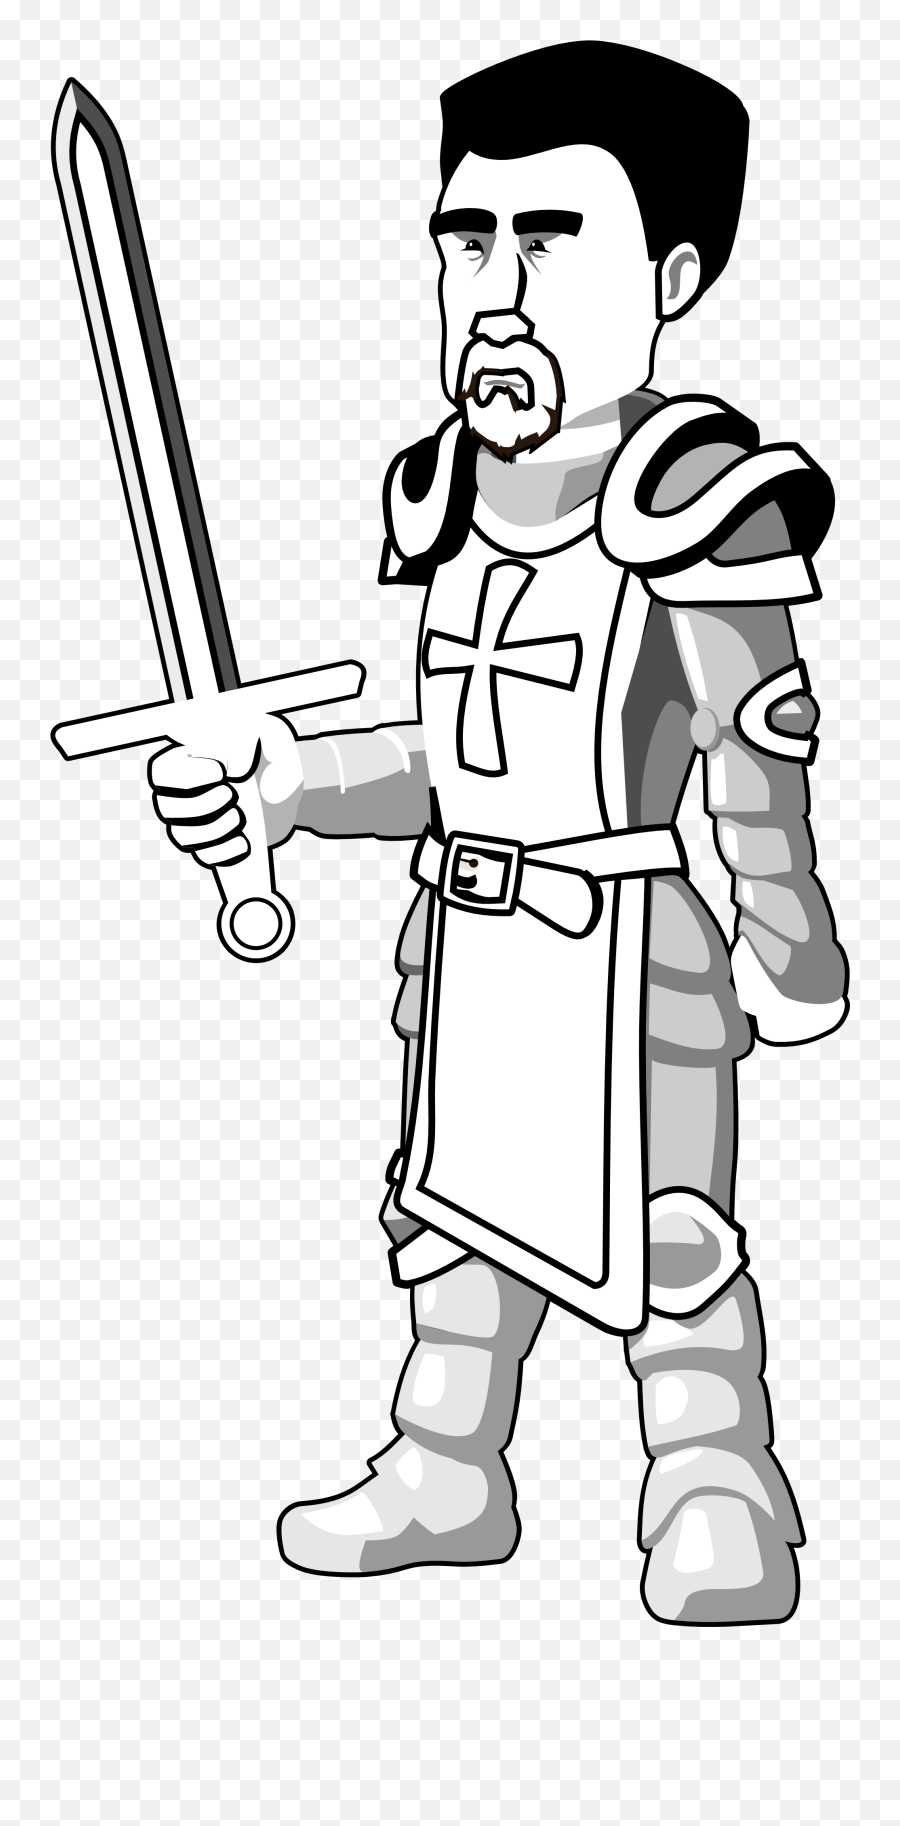 Knights Clipart Clear Knights Clear - Black And White Cartoon Images Of Knights Emoji,White Knight Emoji